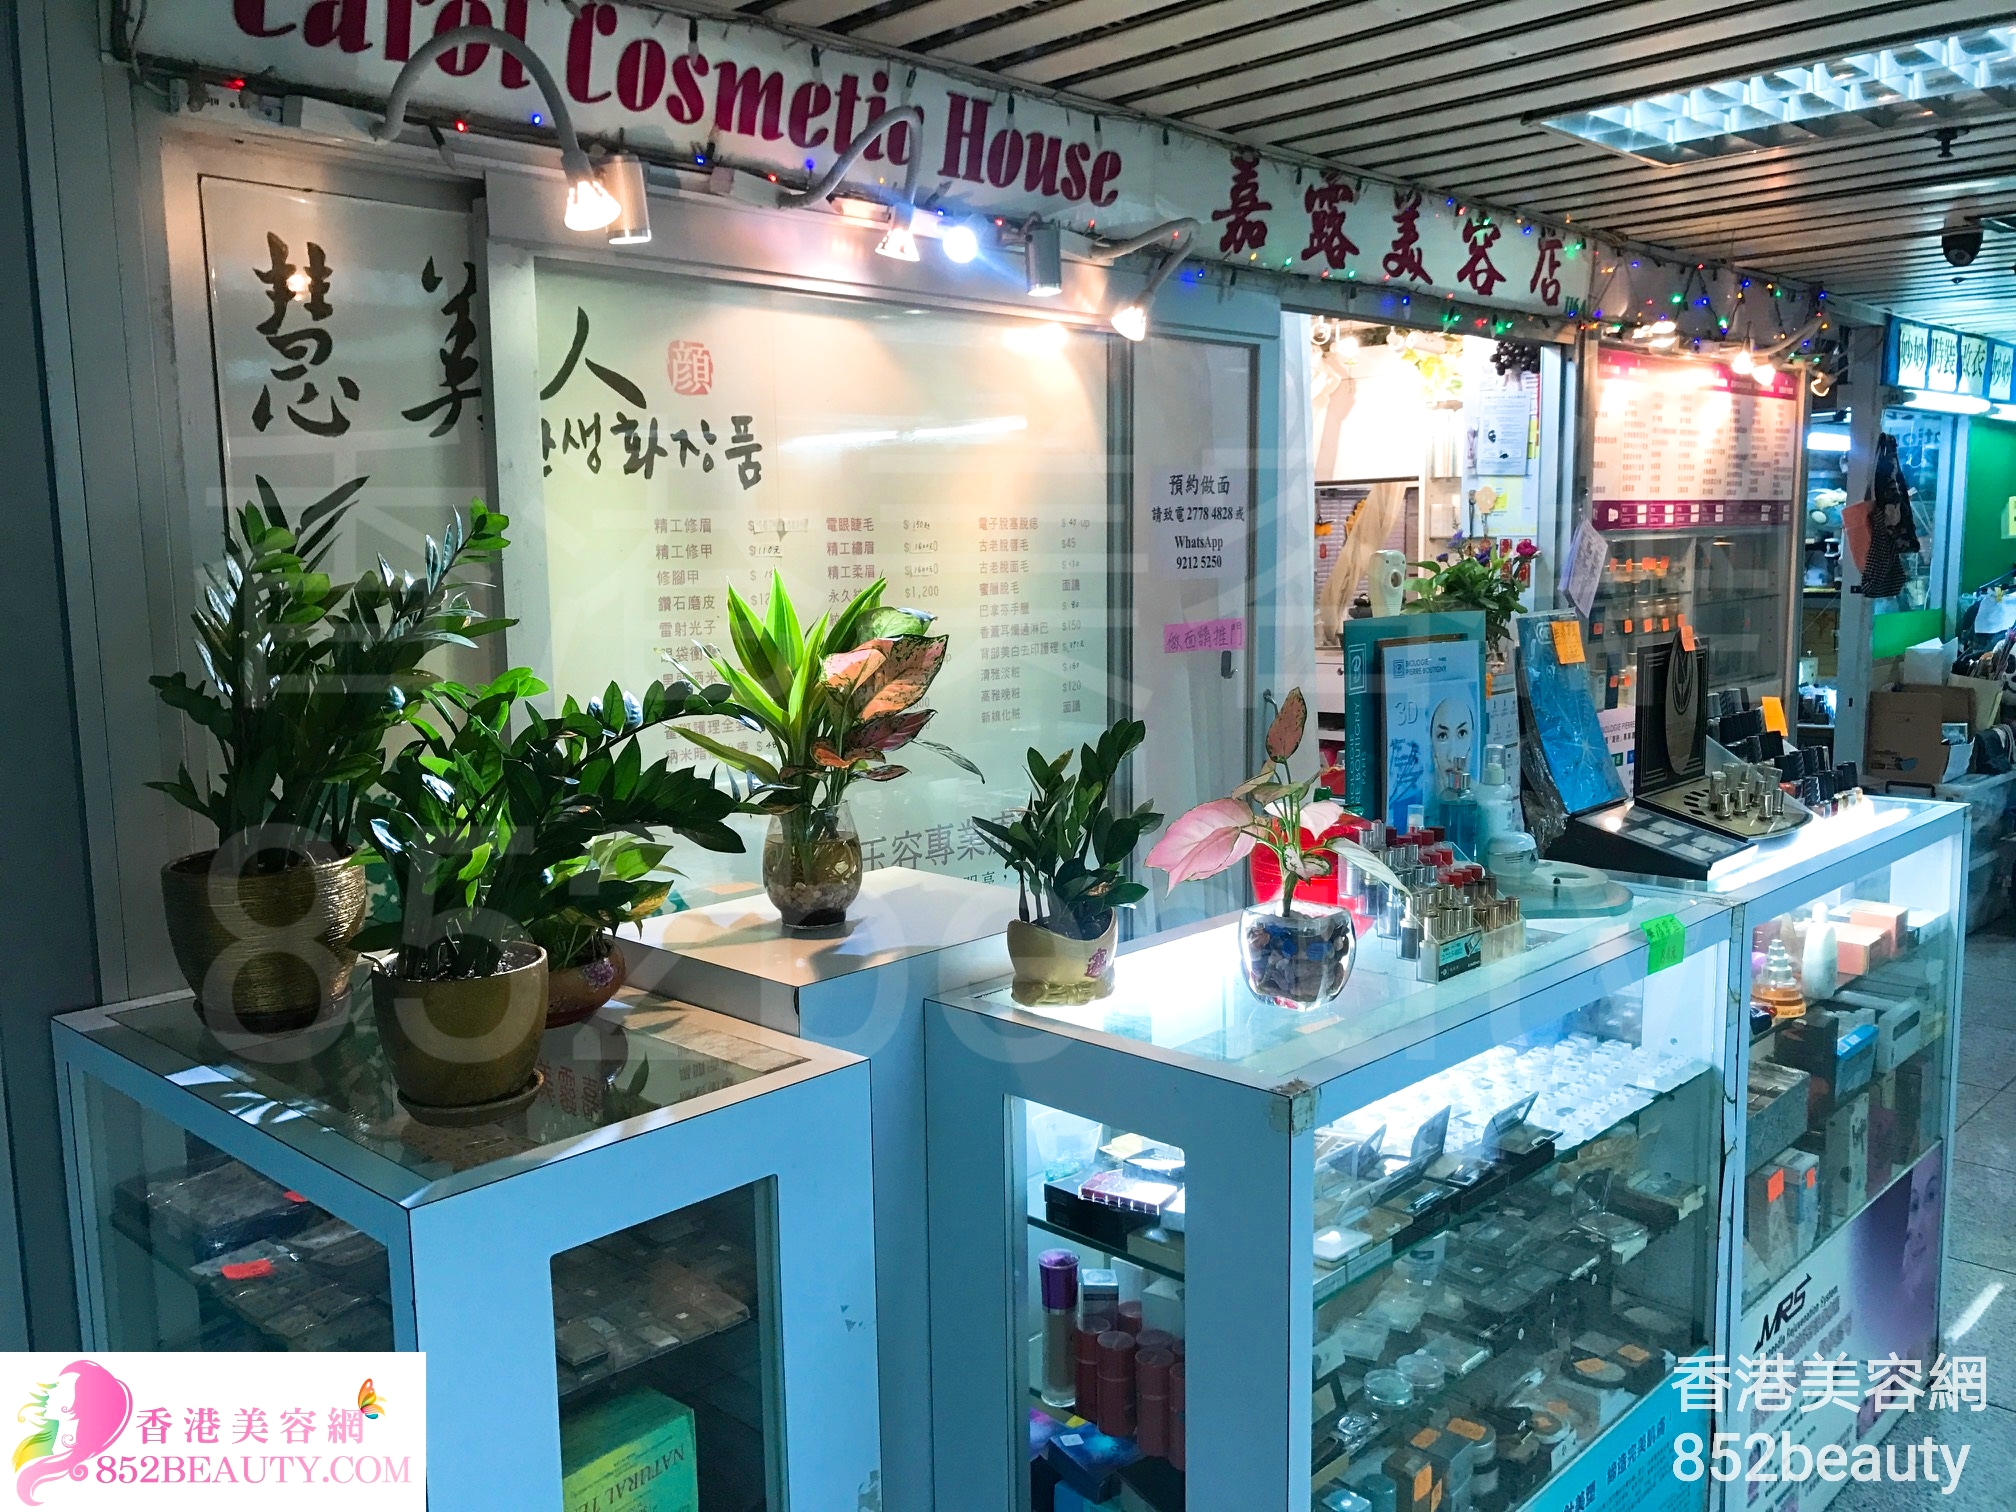 Hand and foot care: 嘉露美容店 Carol Cosmetic House